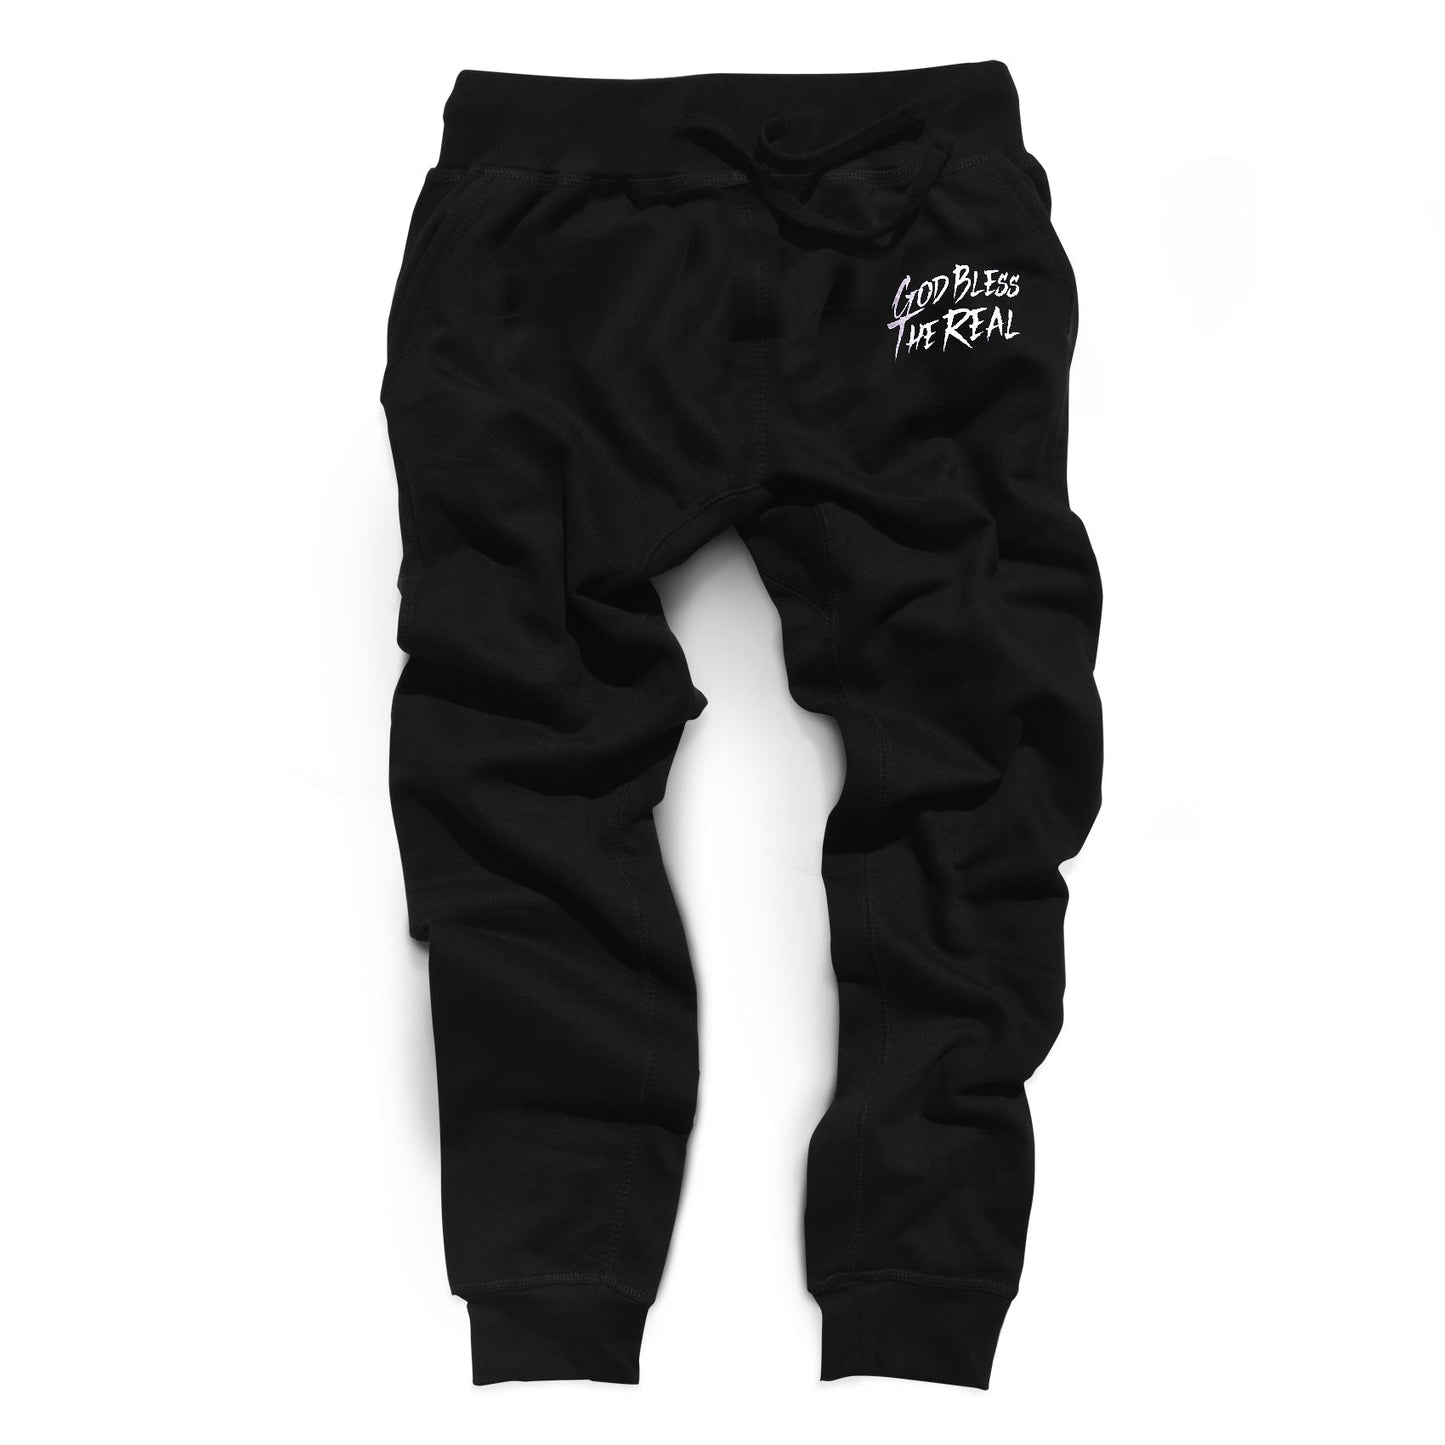 God Bless The Real - Joggers BLACK